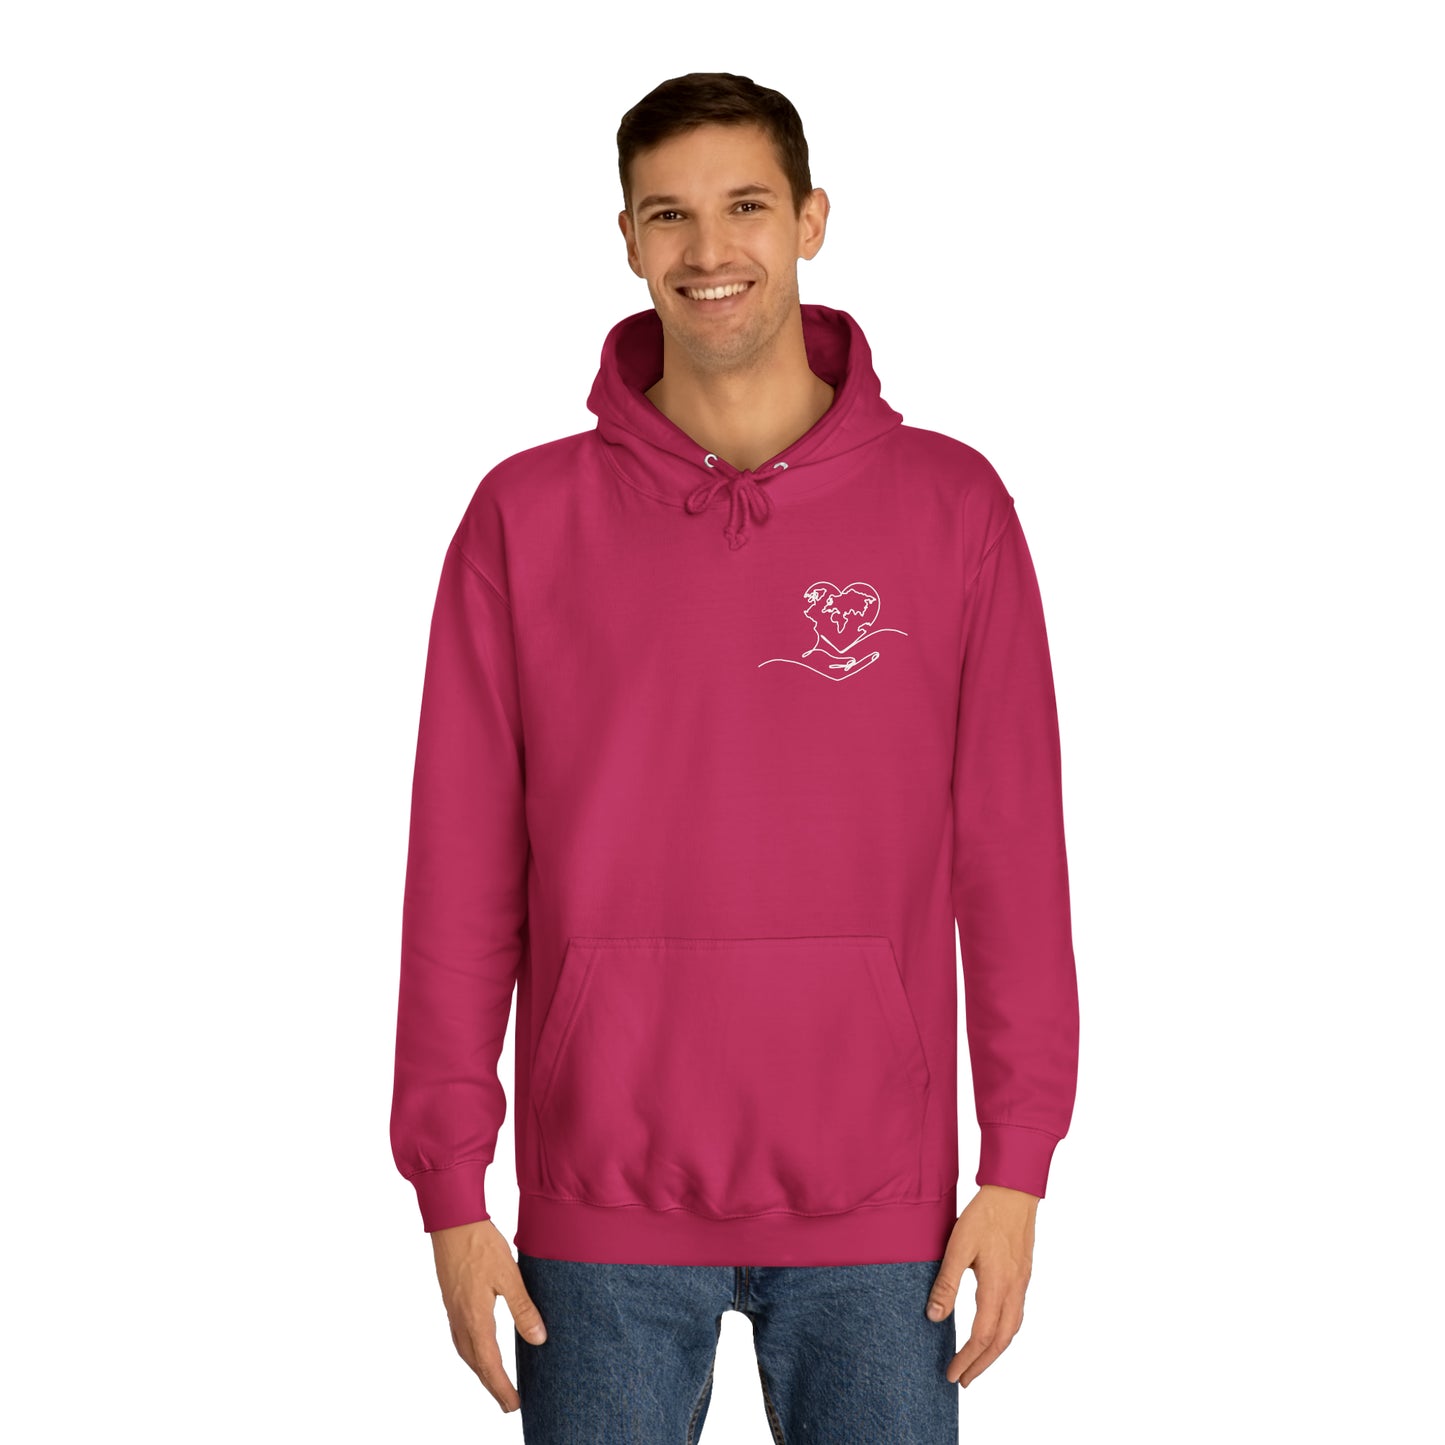 Dominican Republic Mission Trip Hoodie